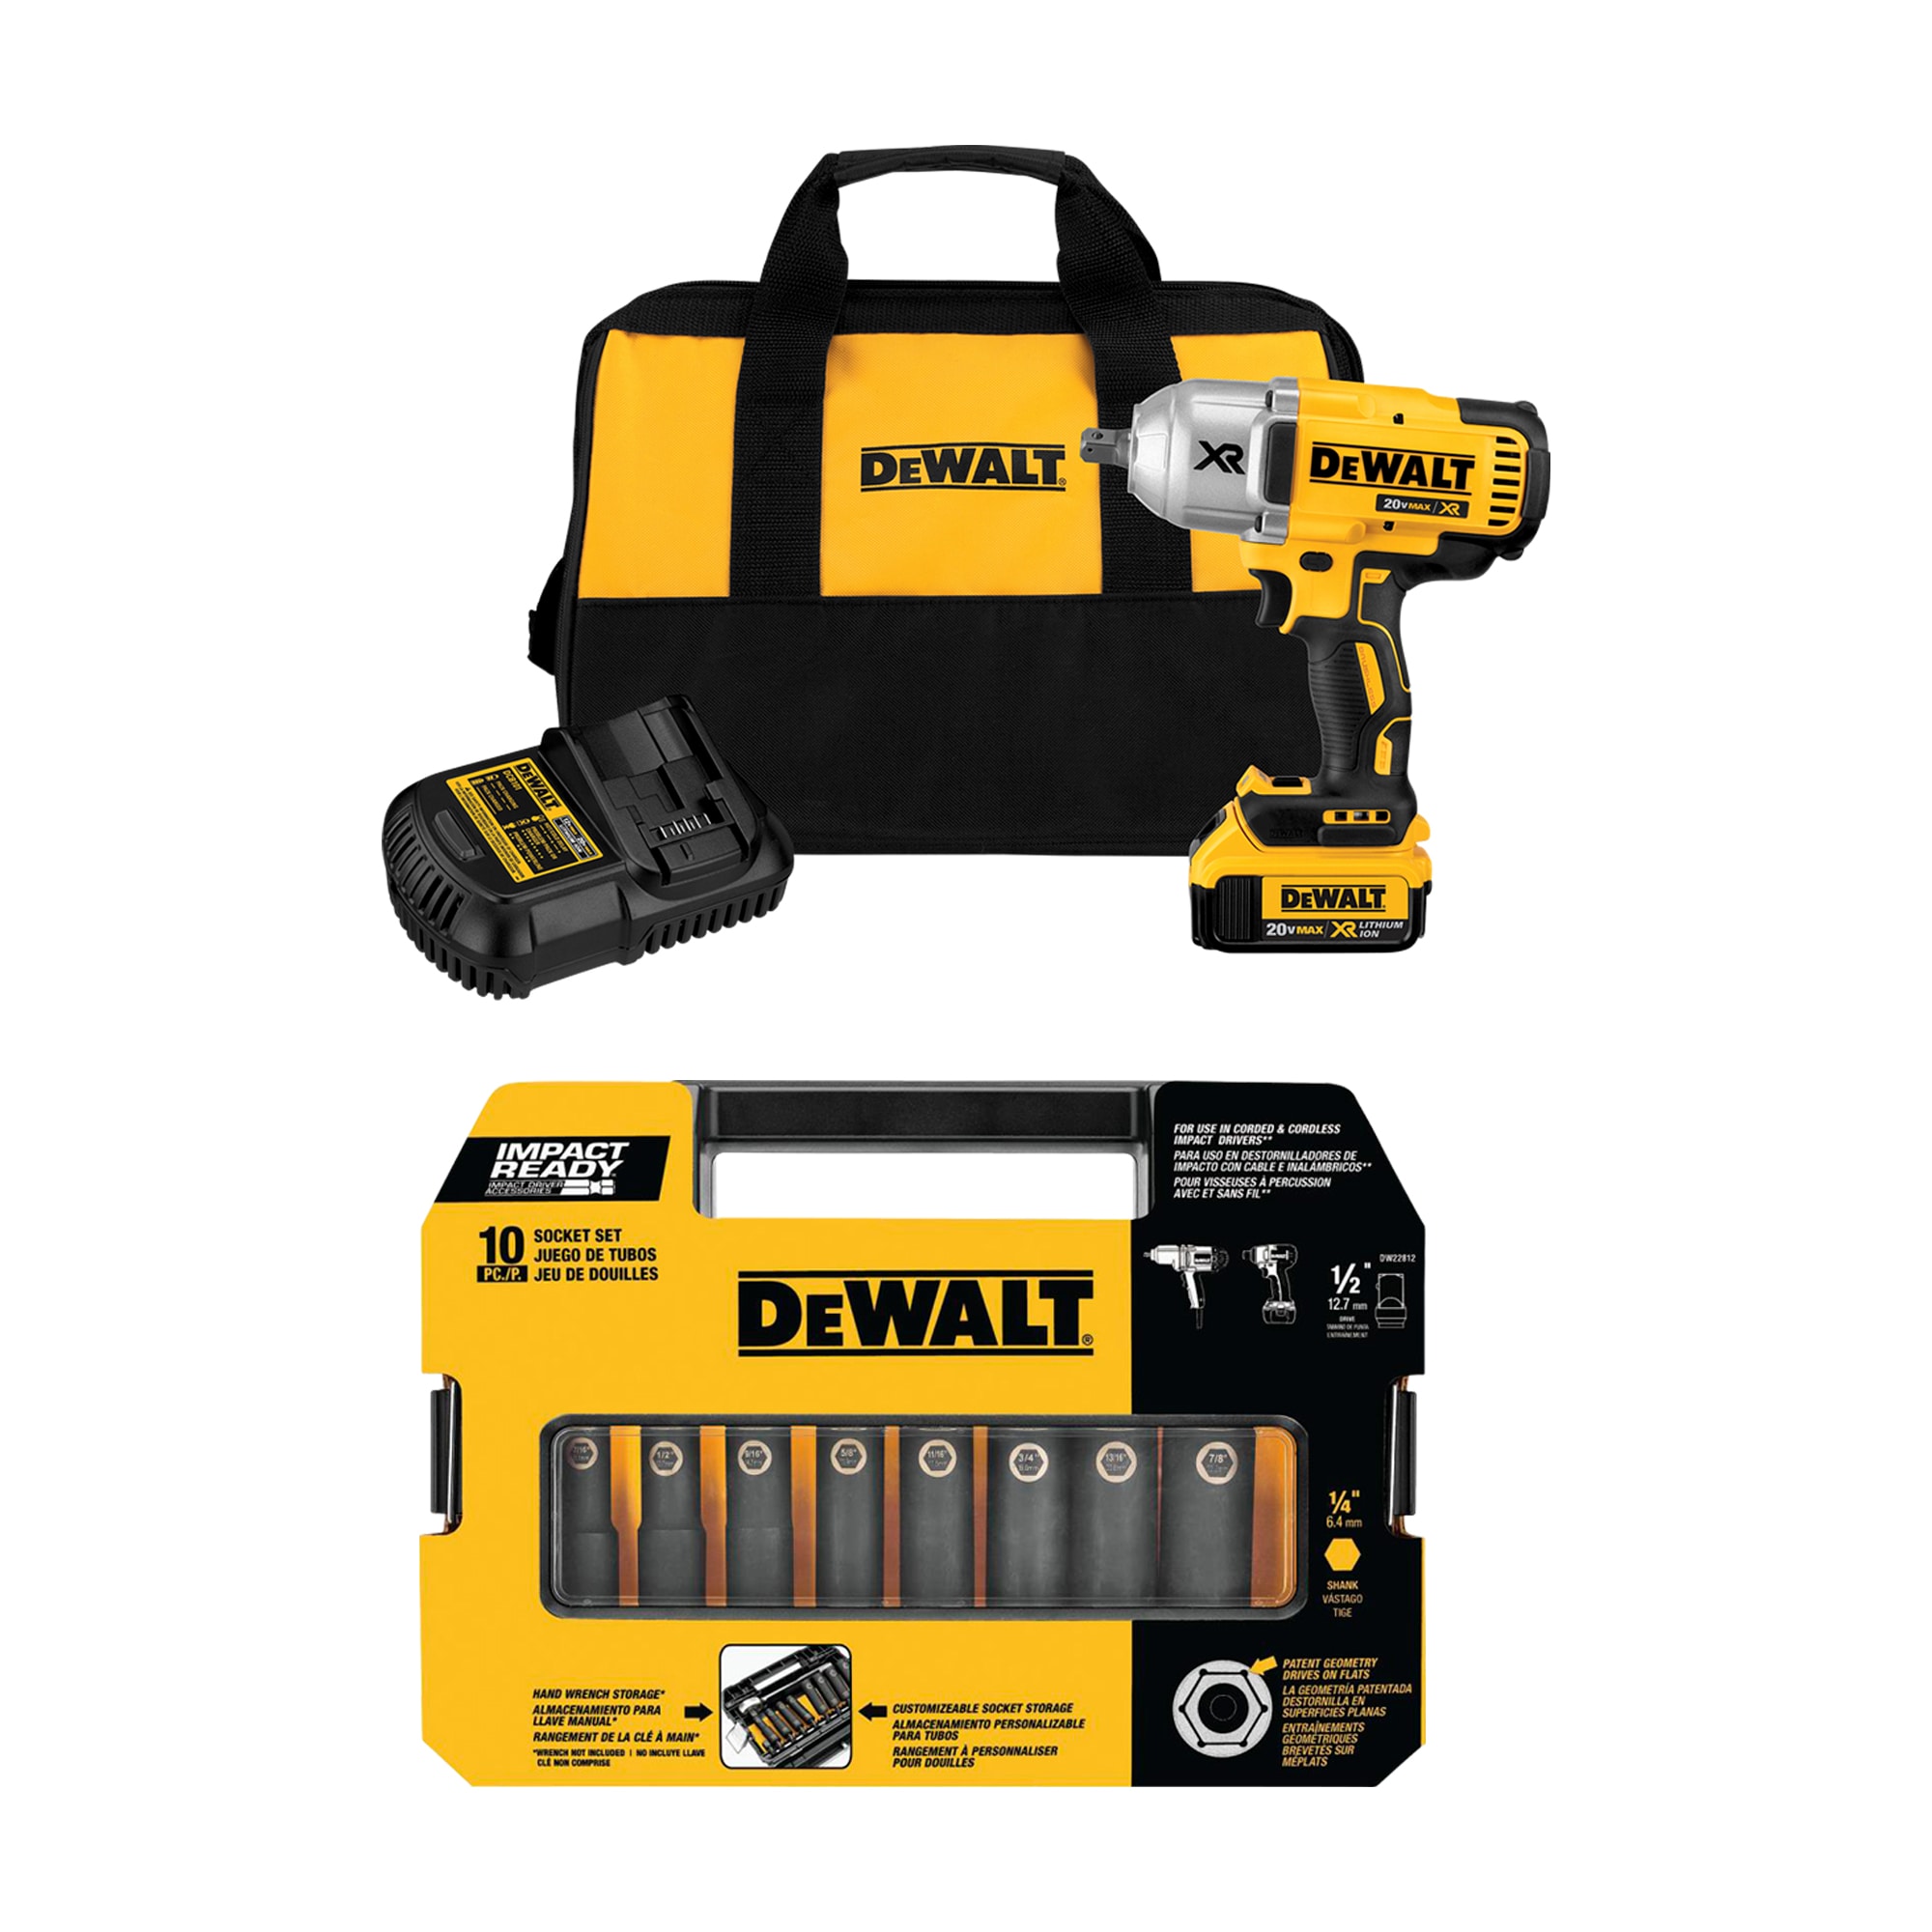 DEWALT XR 20-volt Max Variable Speed Brushless 1/2-in Drive Cordless Impact Wrench (1-Battery Included) & 10-Piece 1/2-in Drive Set Hex Bit Standard